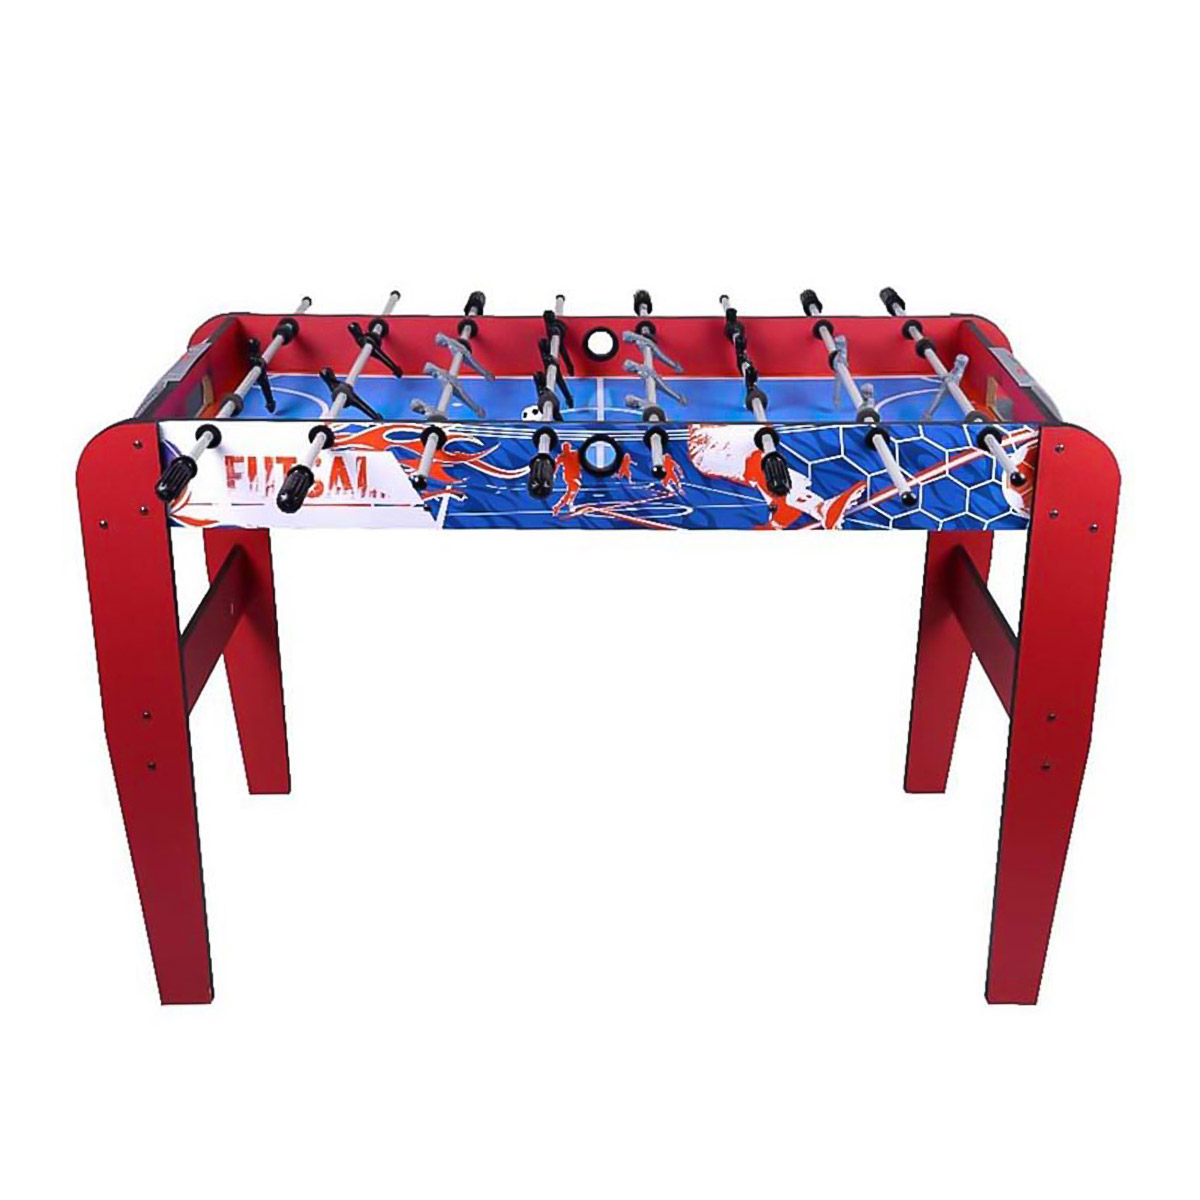 Foosball Soccer Table At Factory Price-China Wholesaler | WIN.MAX Featured Image